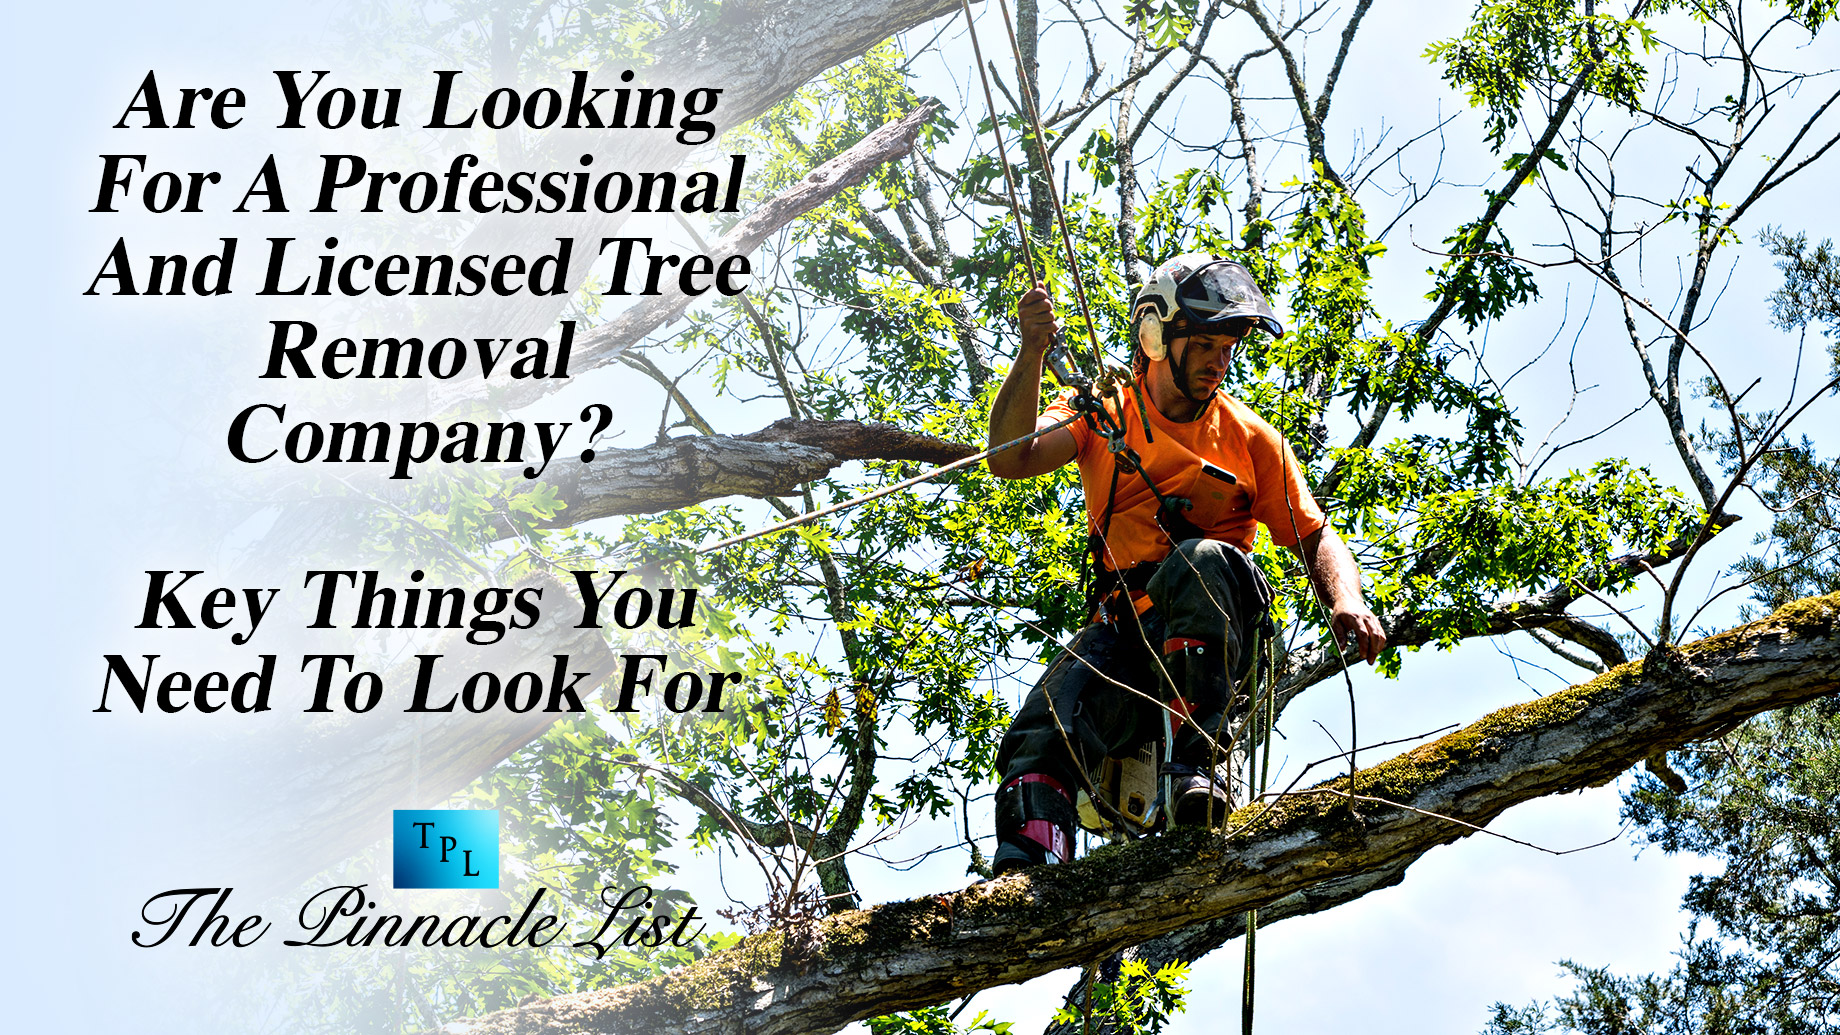 Are You Looking For A Professional And Licensed Tree Removal Company? Key Things You Need To Look For